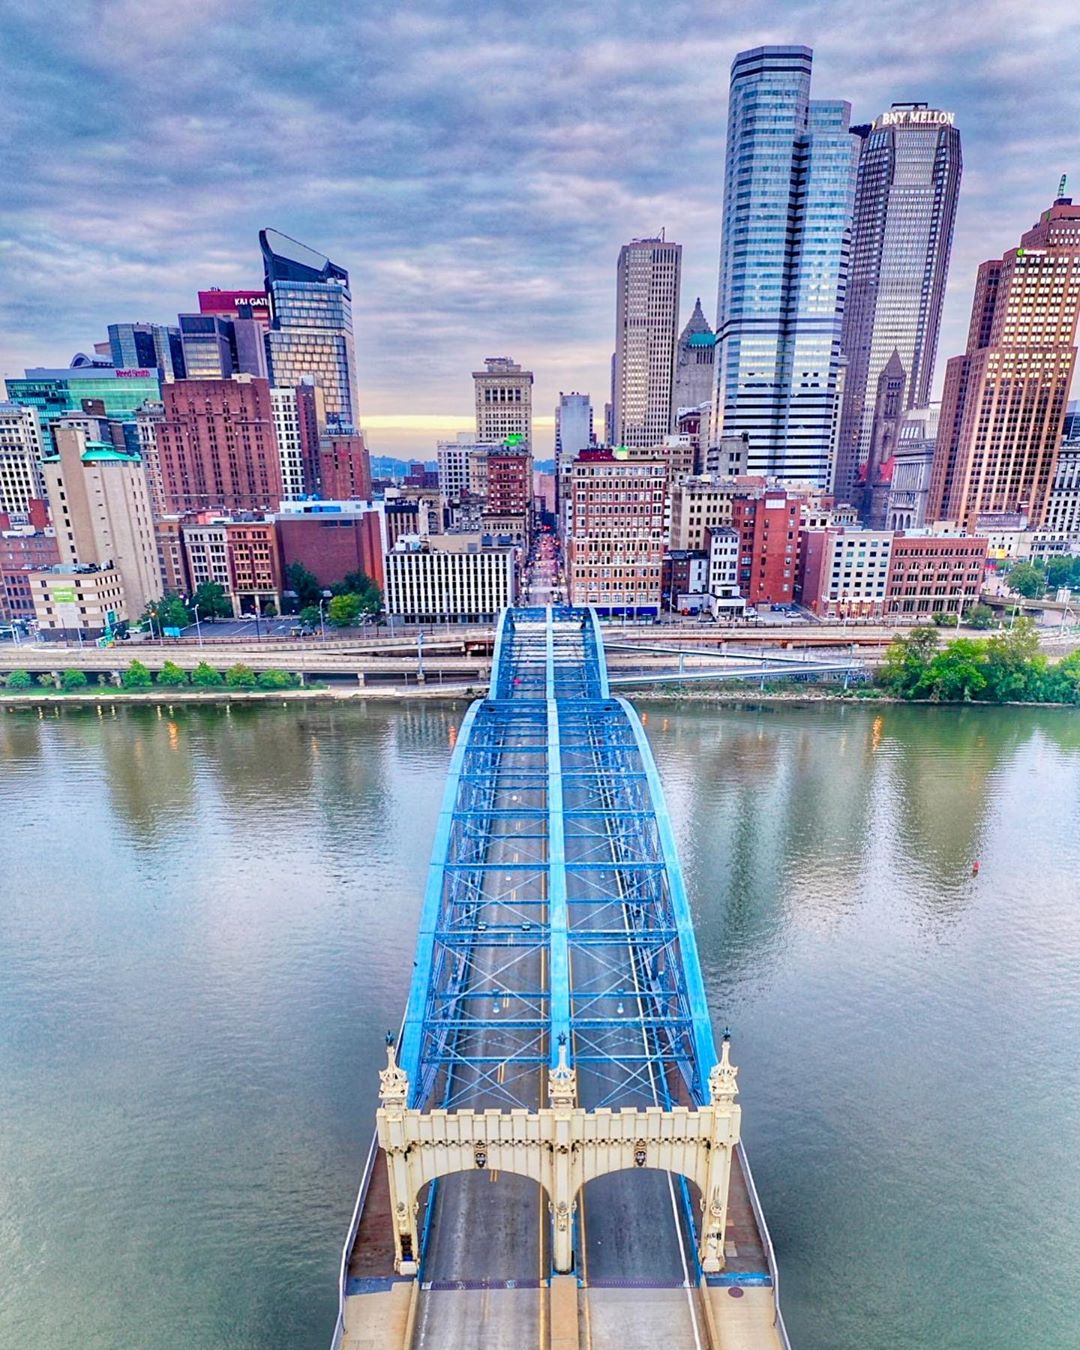 Drone photo of Smithfield Bridge looking into Downtown Pittsburgh. Photo by Instagram user @berksbr